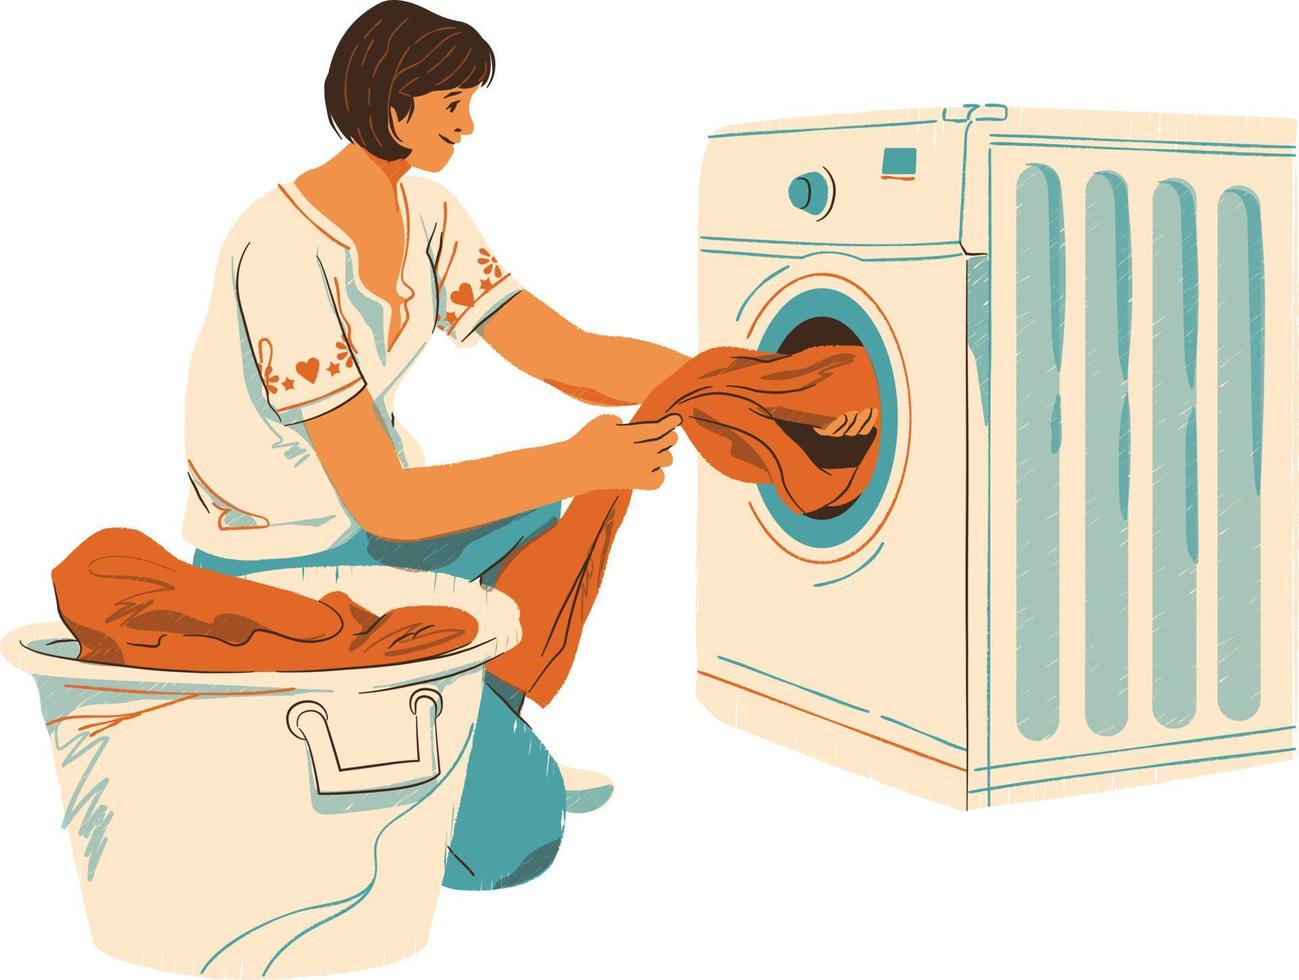 Laundry woman with washing machine. Vector illustration in cartoon style